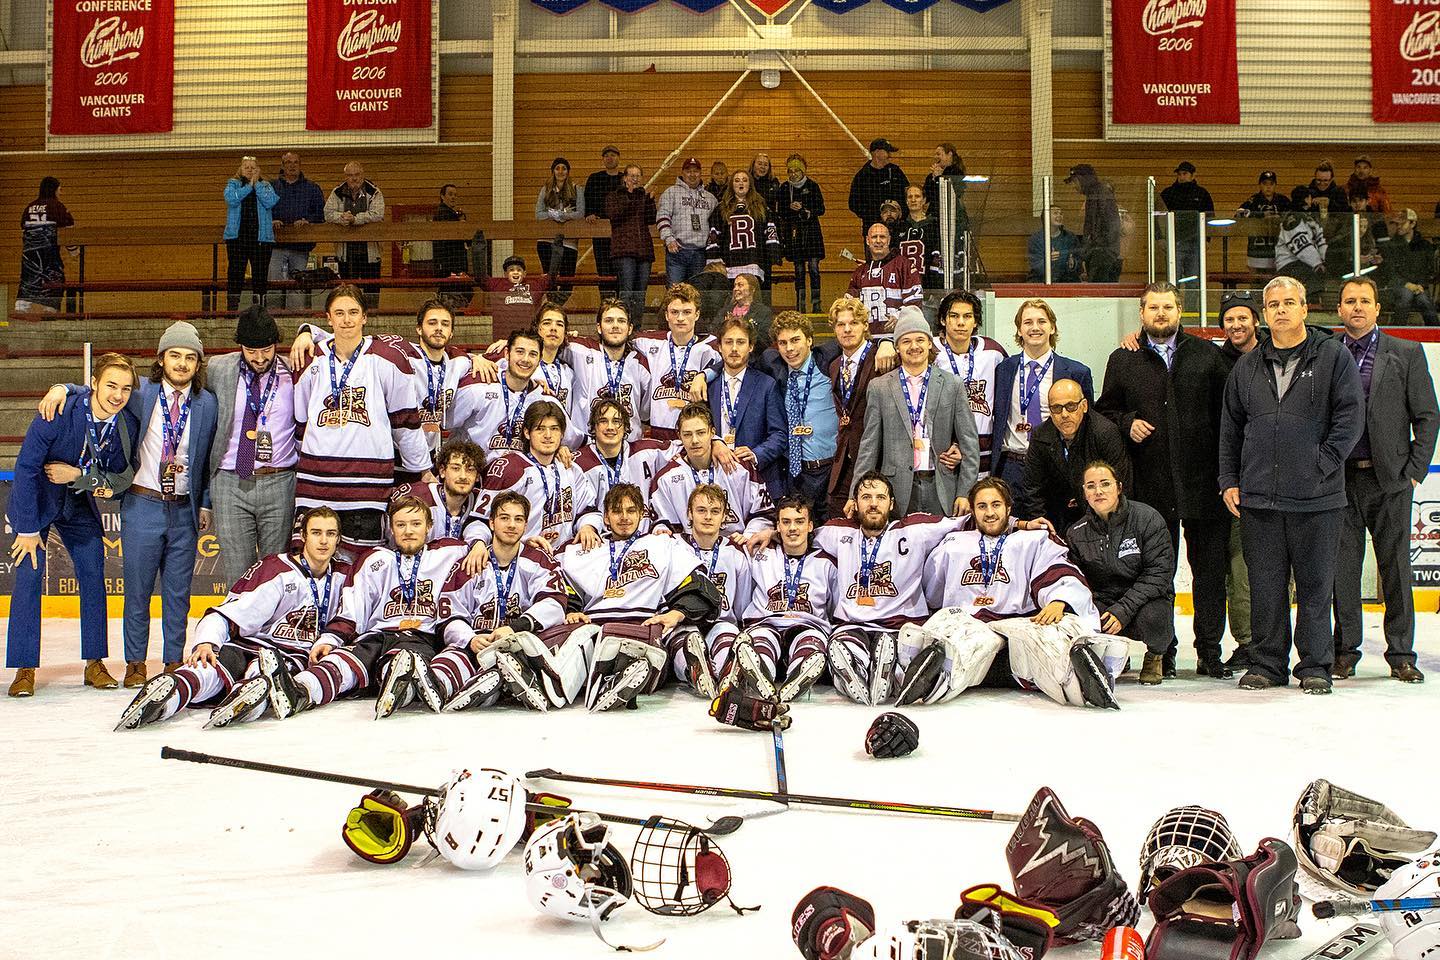 Well ladies and gentleman. Here are your bronze medalist of the 2022 cyclone Taylor cup. The @delta_ice_hawks, @langleytrappers and @ppanthersvijhl all put up a tough battle. 
A huge thanks to all of the amazing fans and family members that made it out! We wish you a safe travel home. 

Go grizzlies go!! 🇨🇦🇺🇦

📸 @timminsphotos 

#RevelstokeGrizzlies #BeAGrizzly #GrizzliesFuture #CycloneTaylorCup #KIJHL #SeasonOver